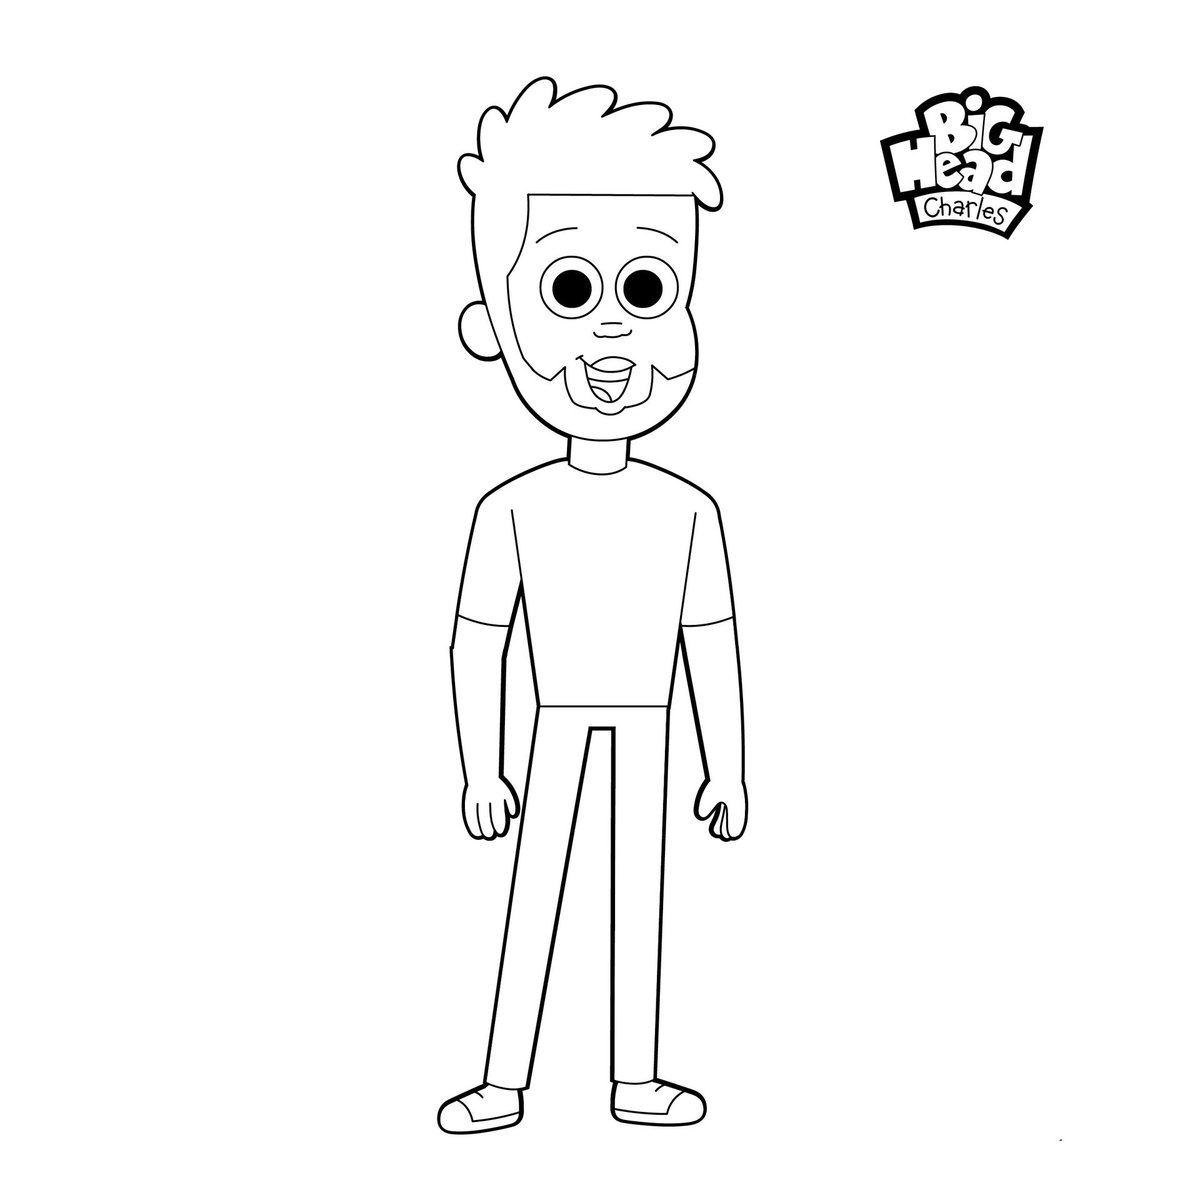 🎉 Free Coloring Sheets 🎉

Now available on BigHeadCharles.com

#lafespaceart #bigheadcharles #coloringsheets #kidsactivities #adultcoloring #freecoloringpages #simplecharacters #funforall #unwind #destress #creativity #letyourimaginationrunwild